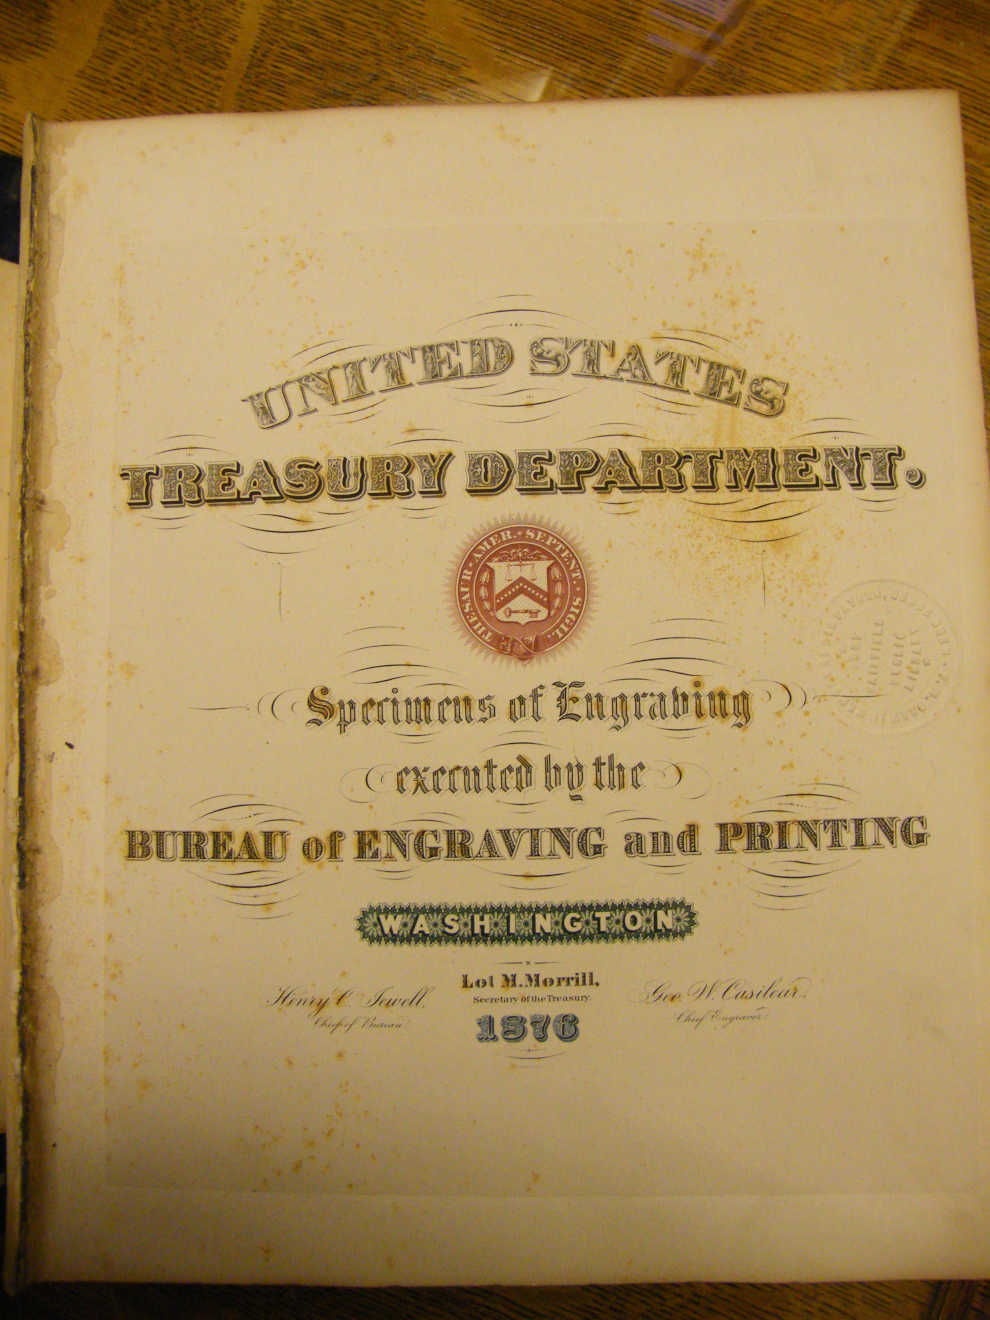 Title page of goldleaf, embossed Specimens of Engraving Book given to Colonel Franklin Drew by Lot Morrill, the 31st Secretary of the Treasury under Ulysses S Grant and the 28th Governor of Maine. Photo courtesy of Fort Fairfield Public Library.